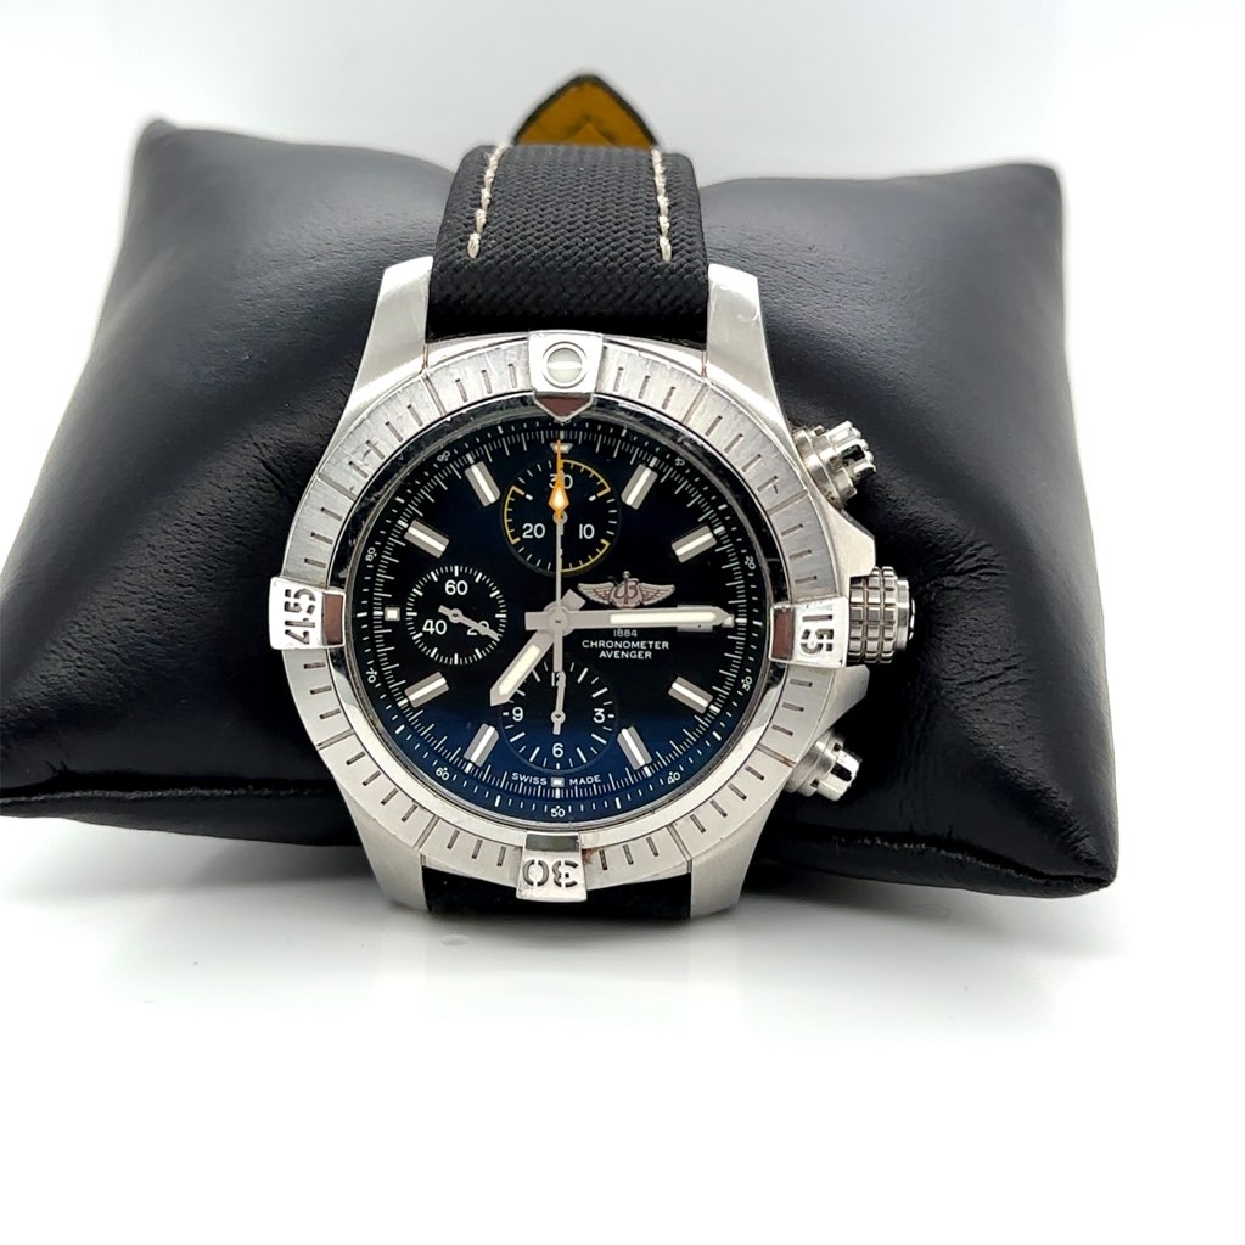 Breitling Chronometer Avenger Watch Black Dial

Reference: A13317101B1X1
Serial #: 7083289

*Certificate on file